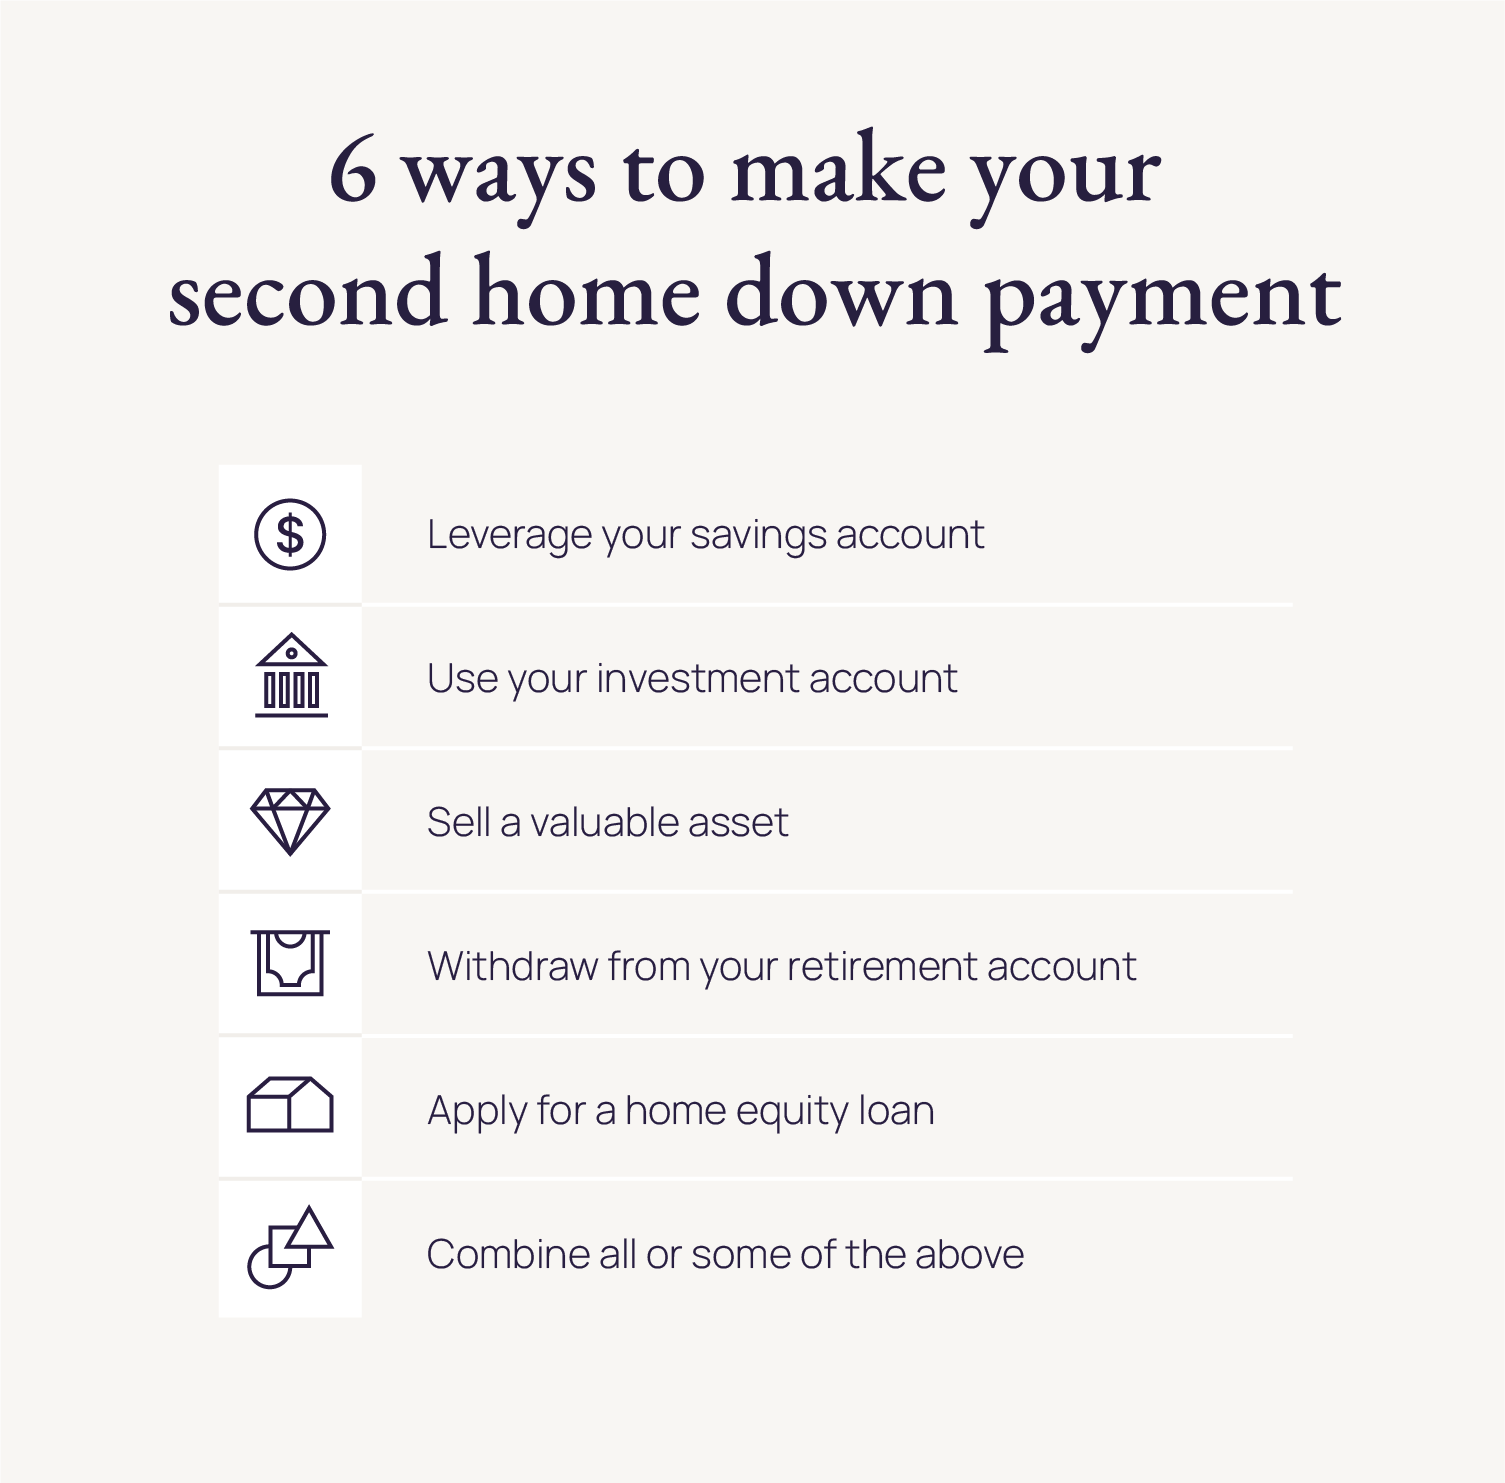 Can You Pay Less Than 20% As a Down Payment on a House?